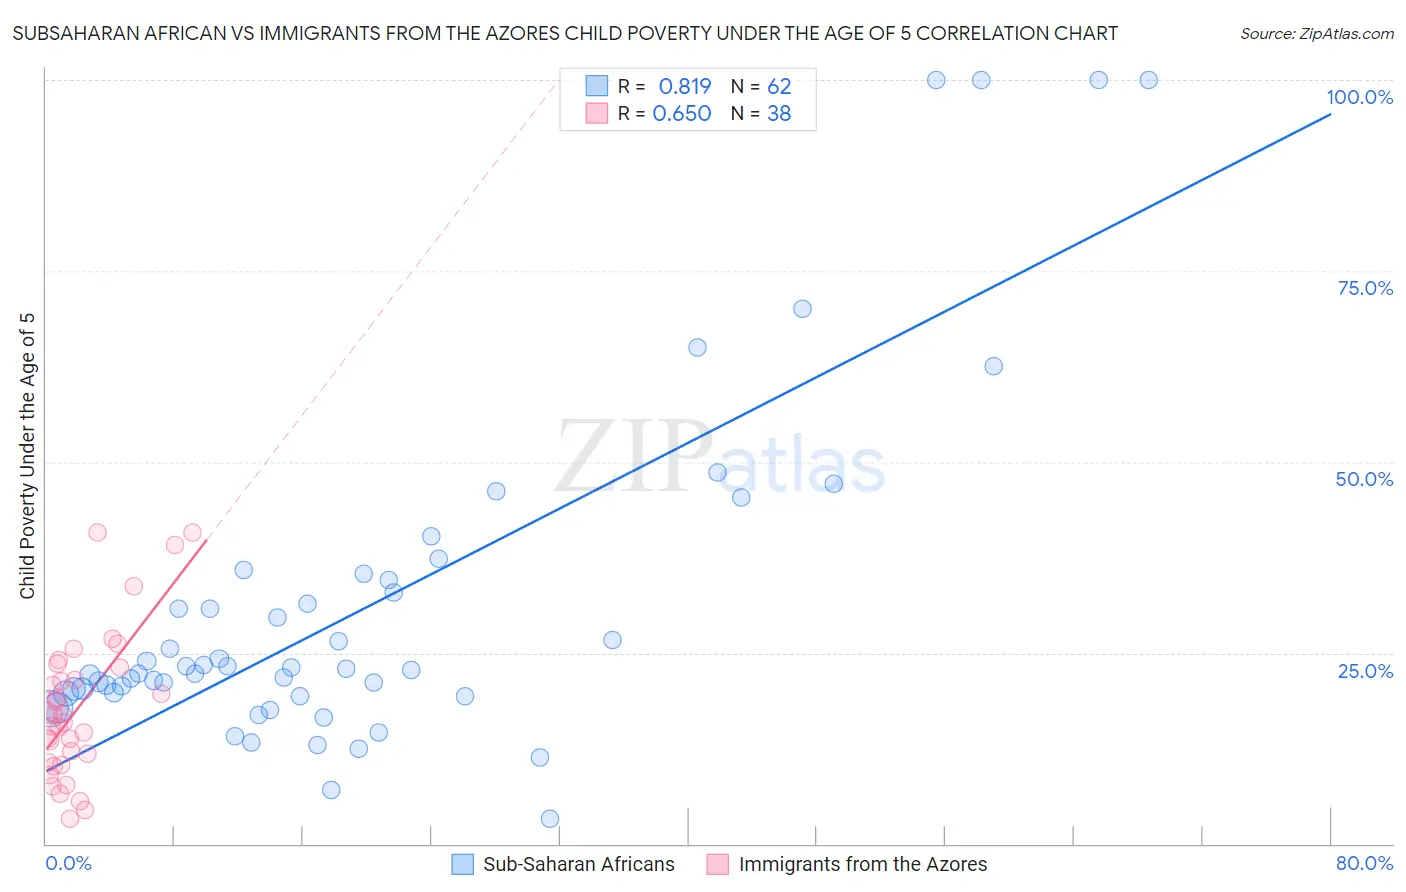 Subsaharan African vs Immigrants from the Azores Child Poverty Under the Age of 5